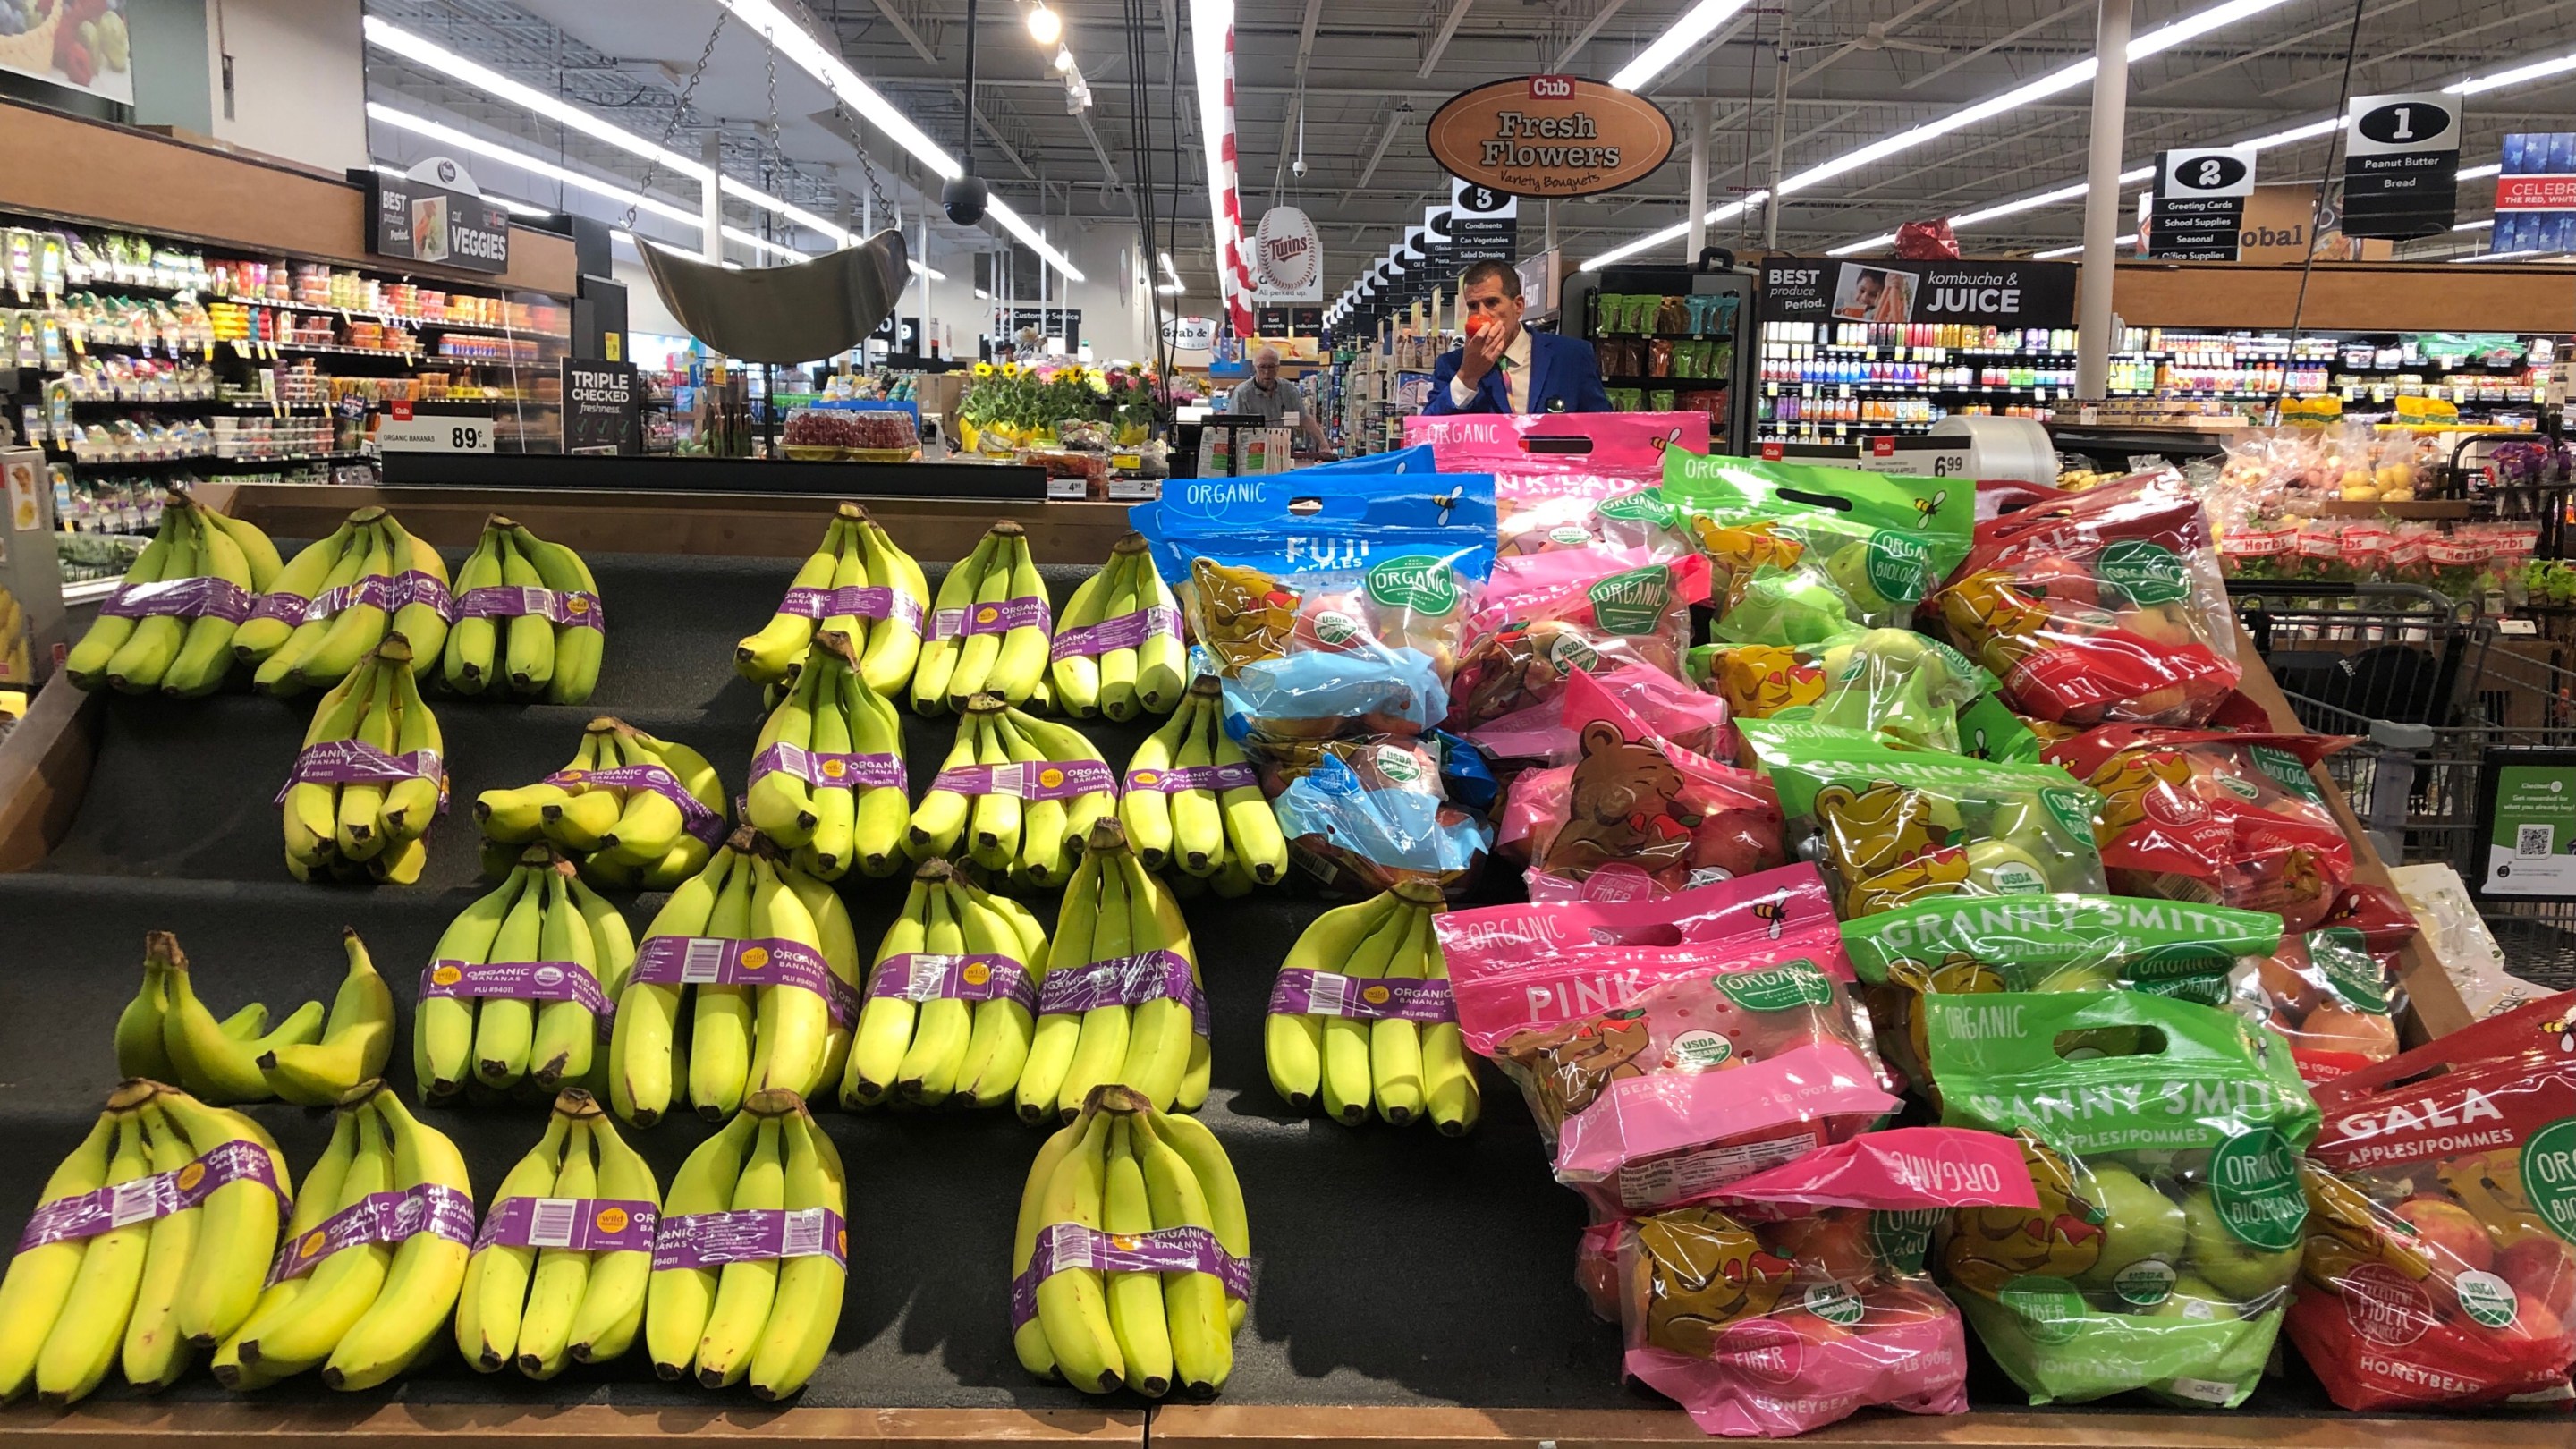 a display of organic bananas and apples inside the uptown cub